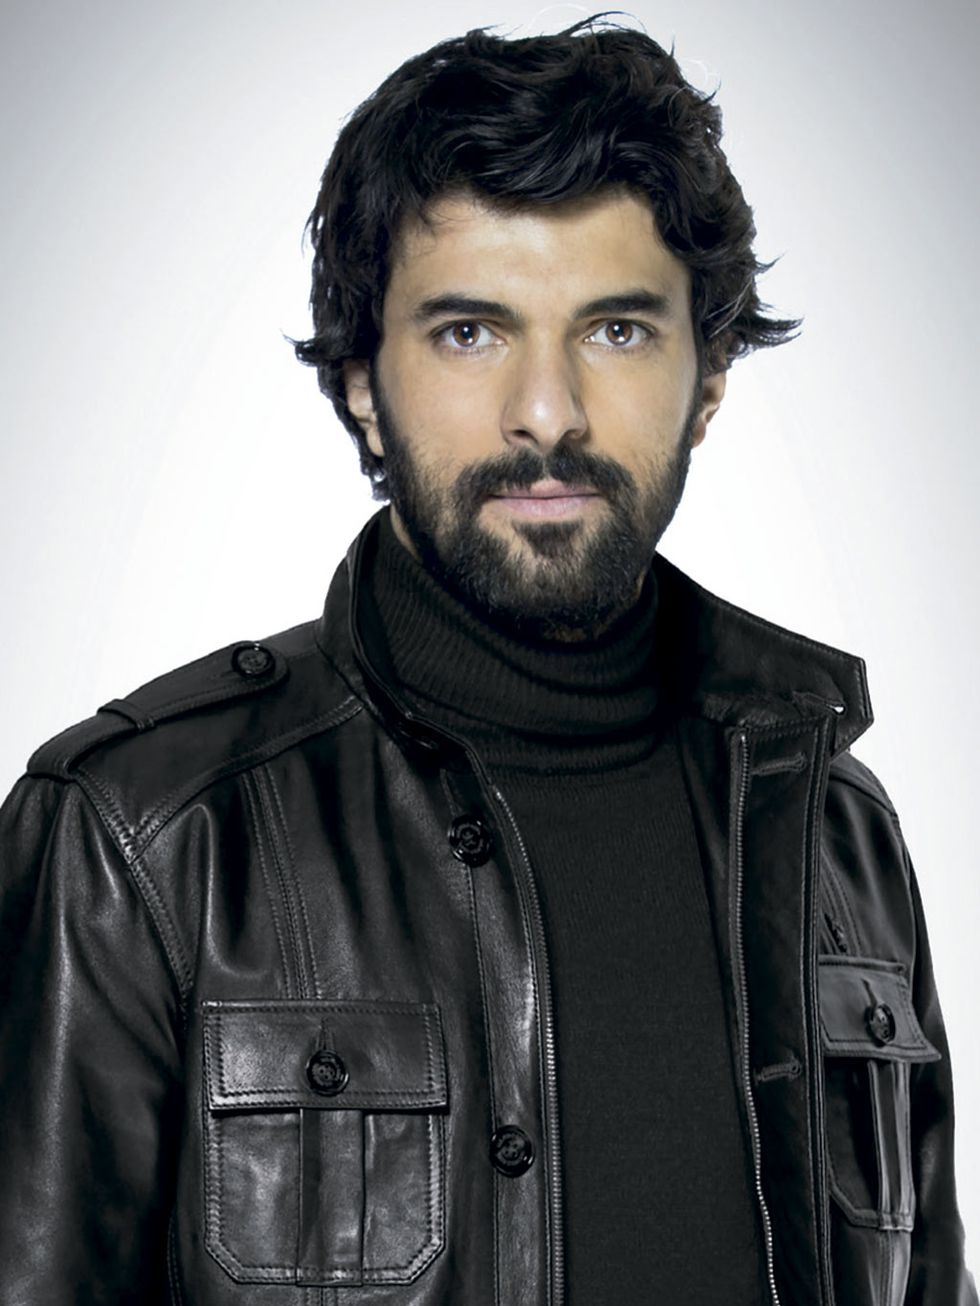 Hair, Facial hair, Beard, Leather, Jacket, Leather jacket, Hairstyle, Textile, Outerwear, Cool, 